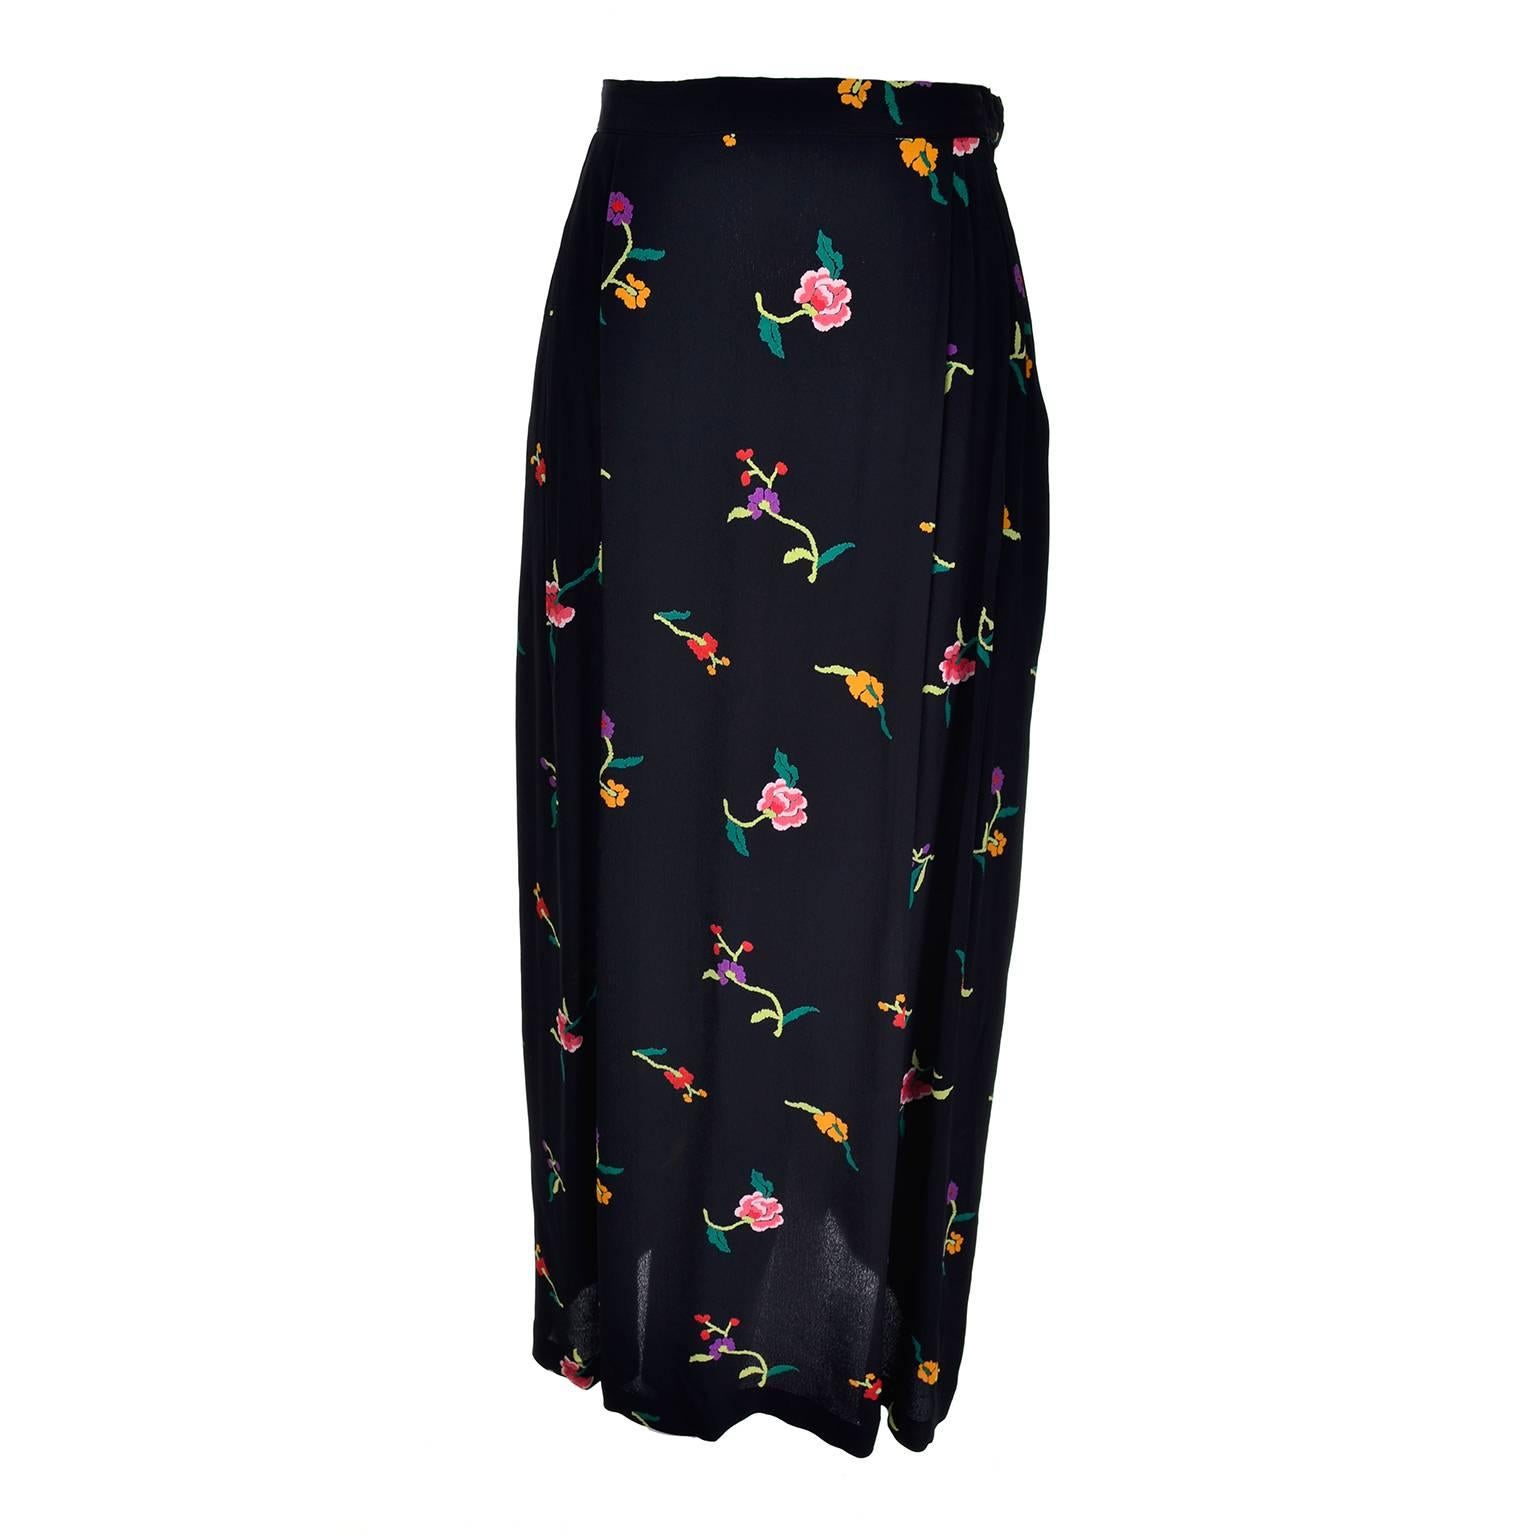 This pretty vintage floral silk skirt was designed by Norma Kamali and is labeled a size 10. The skirt has a side zipper and double pleats at the bottom that allow it to form a fish tail effect.  The skirt has a 30